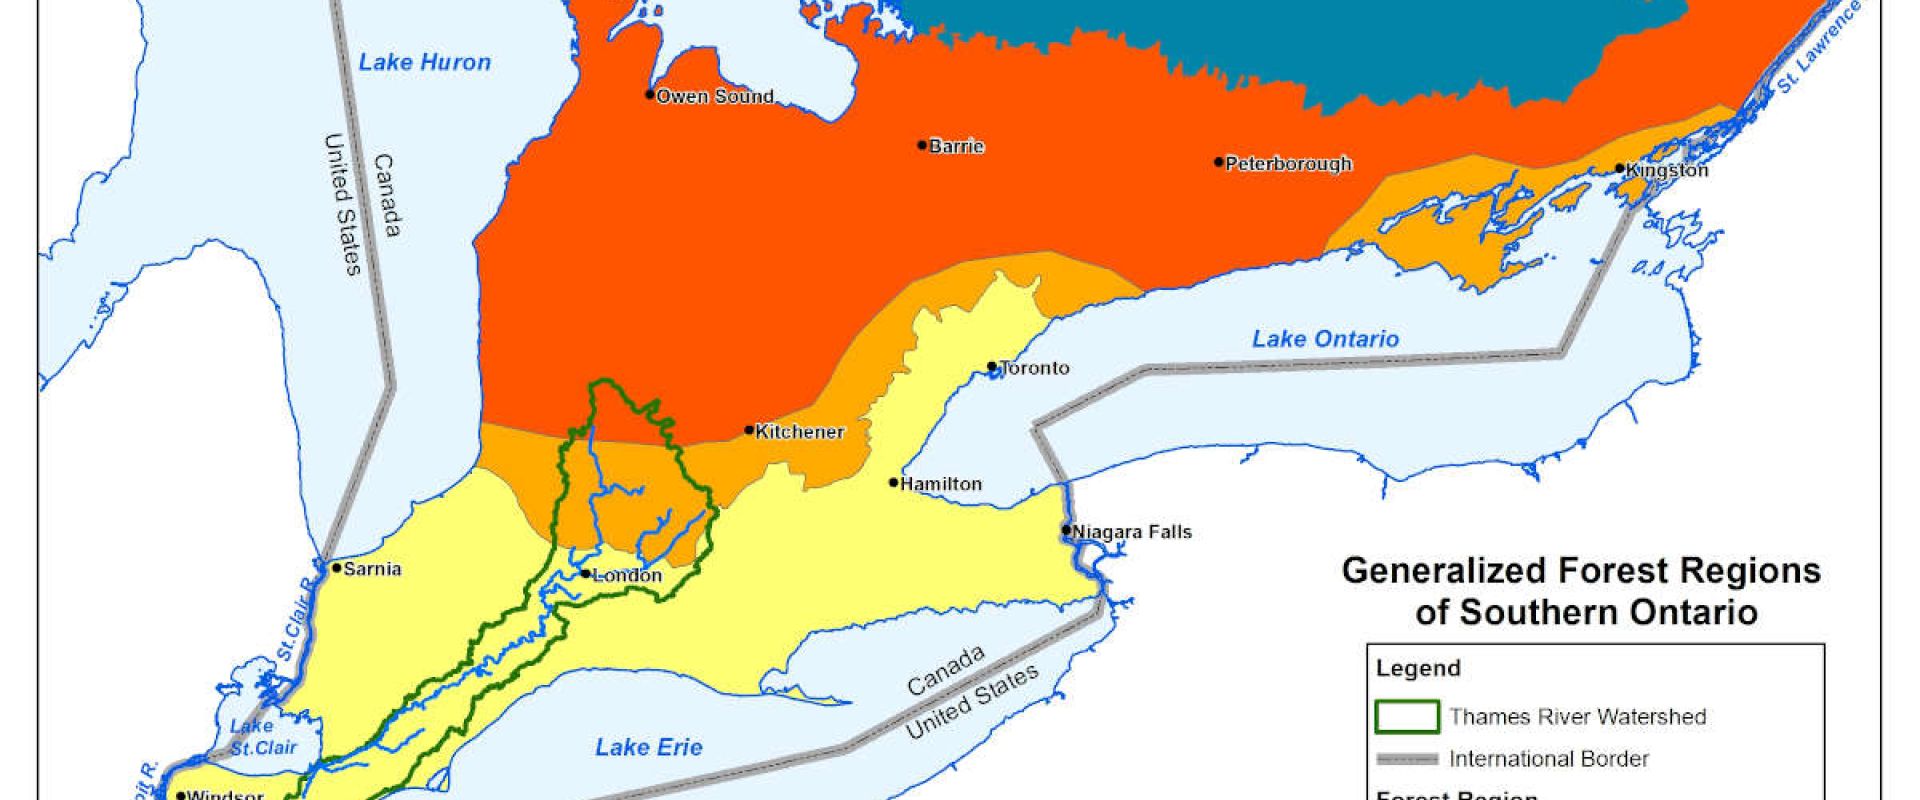 Colourful map of Ontario's forest regions with the Carolinian Life Zone occupying the most southerly extent.